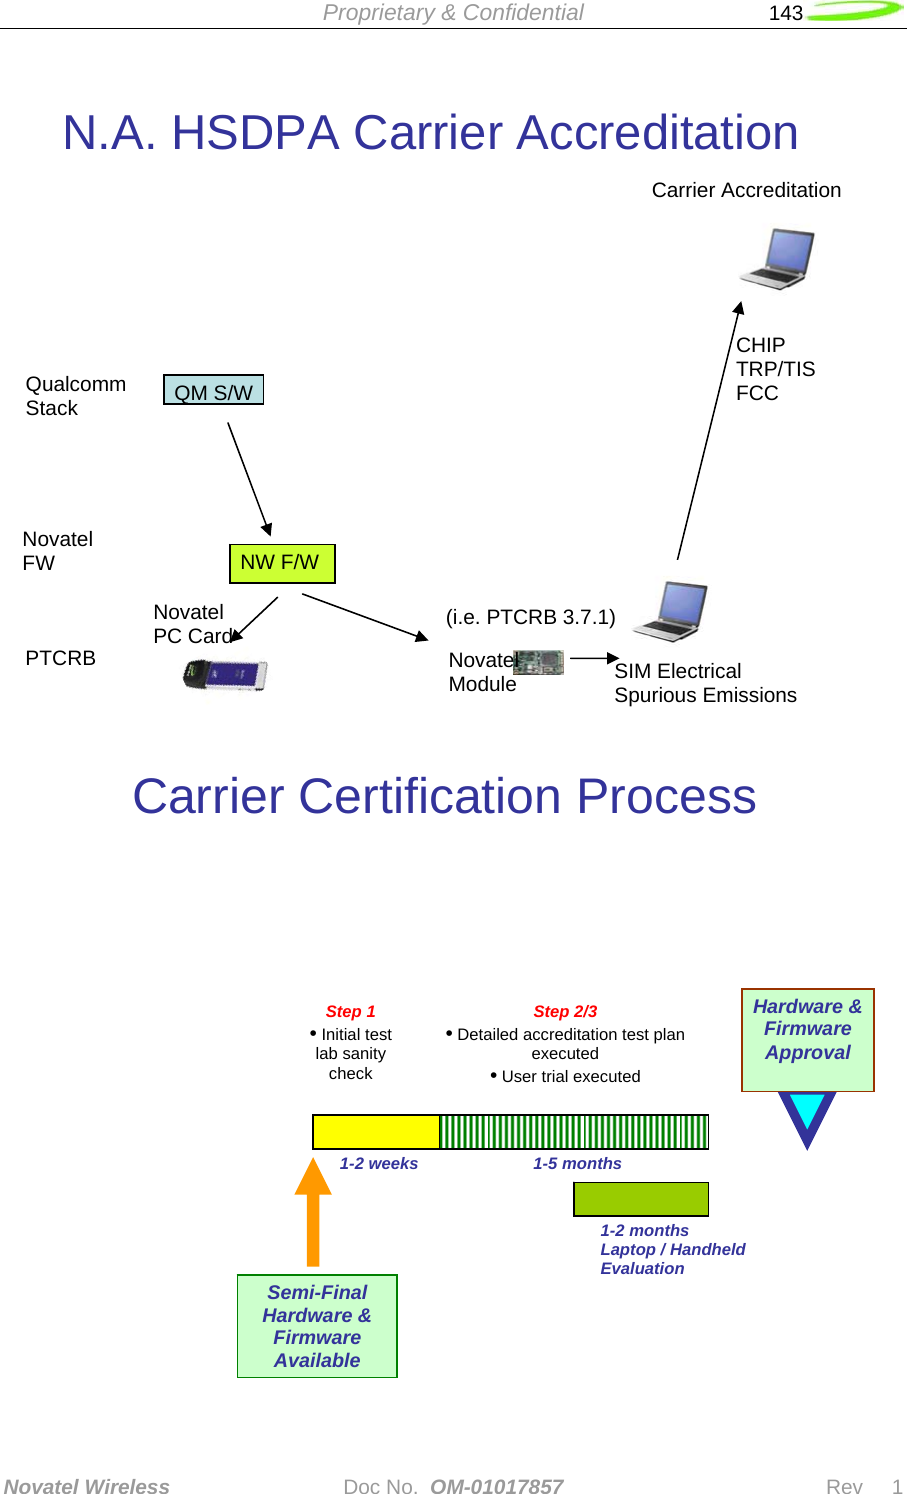  Proprietary &amp; Confidential   143   Novatel Wireless   Doc No.  OM-01017857                              Rev     1    N.A. HSDPA Carrier Accreditation QM S/W Qualcomm Stack Novatel  FW PTCRB  (i.e. PTCRB 3.7.1)NW F/W  Novatel  PC Card   Carrier AccreditationNovatel Module  CHIP TRP/TIS FCC SIM Electrical Spurious Emissions Carrier Certification Process Step 2/3 • Detailed accreditation test plan executed • User trial executed Hardware &amp;Firmware Approval 1-5 months 1-2 weeks Step 1  • Initial test lab sanity check 1-2 months Laptop / Handheld Evaluation  Semi-Final Hardware &amp; Firmware Available 